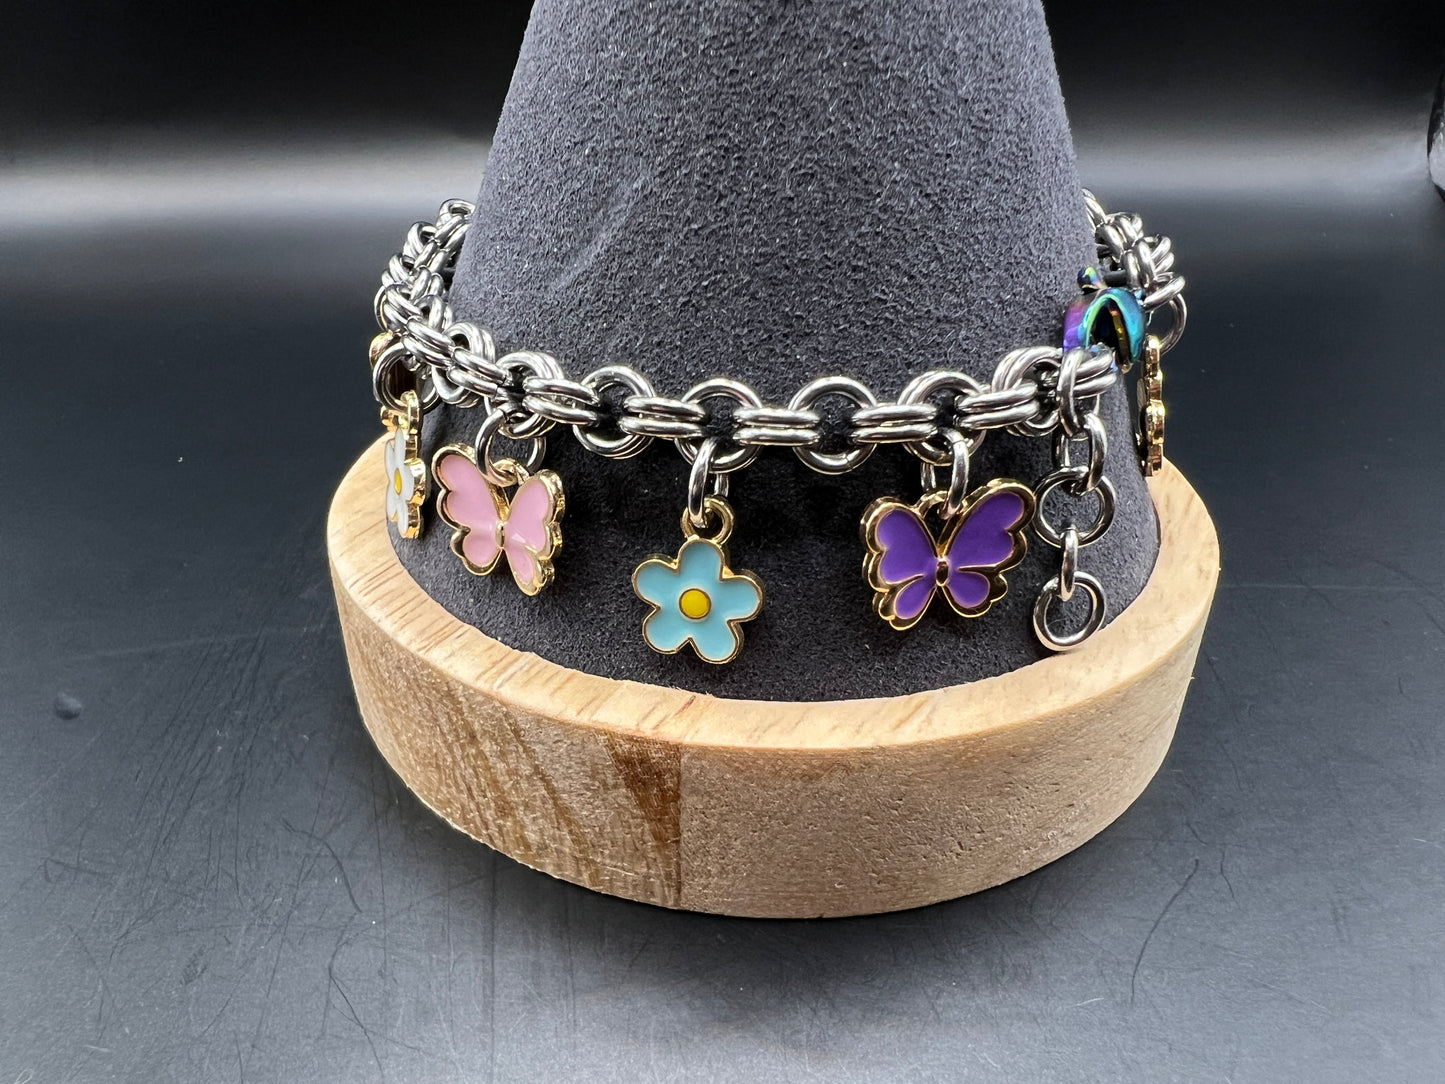 Charmed Spring: Charm Bracelet with Flowers & Butterflies